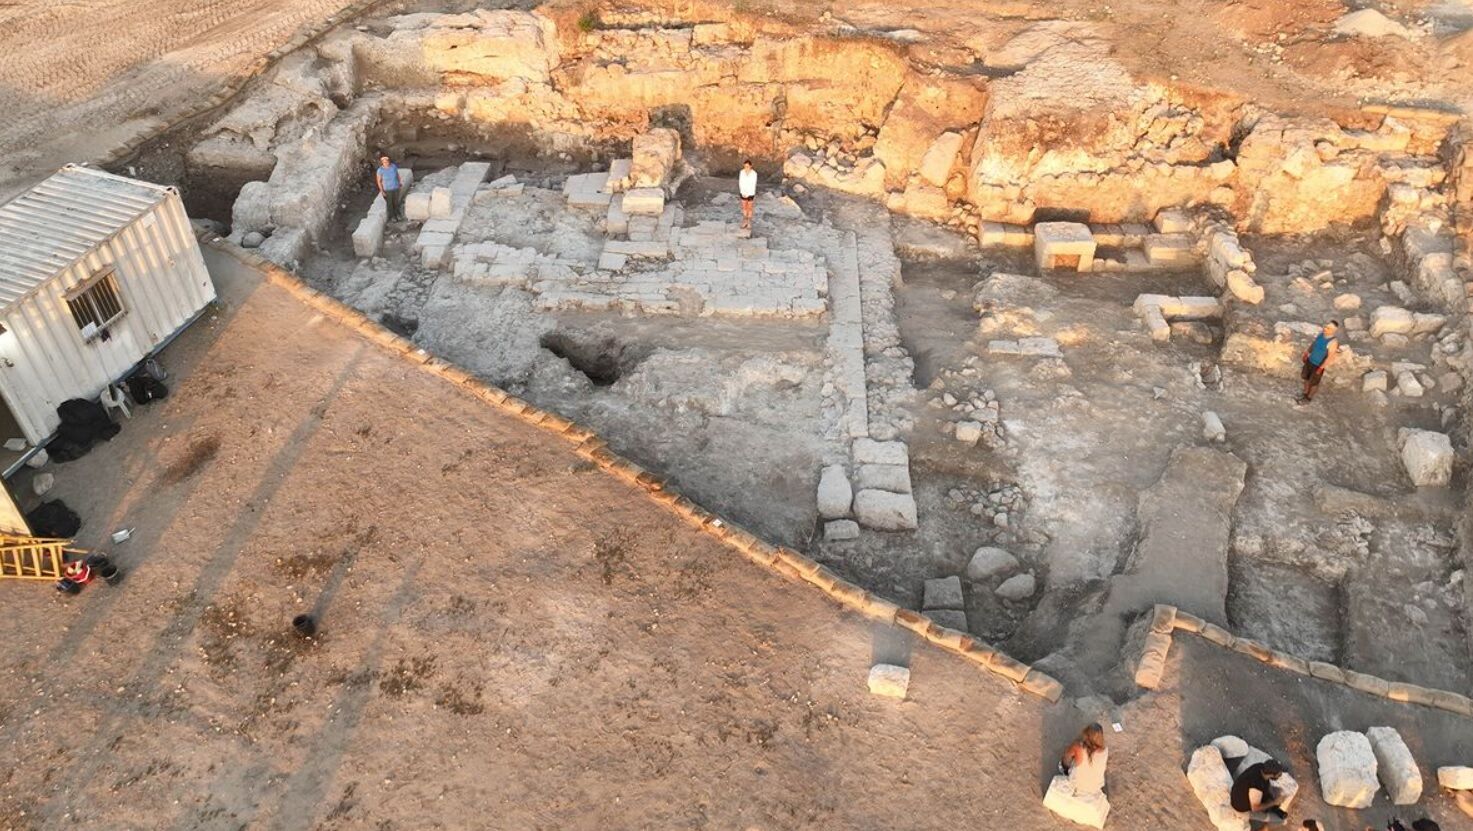 Blood-red walls of 1800-year-old Roman amphitheater unearthed near Armageddon in Israel (photo)